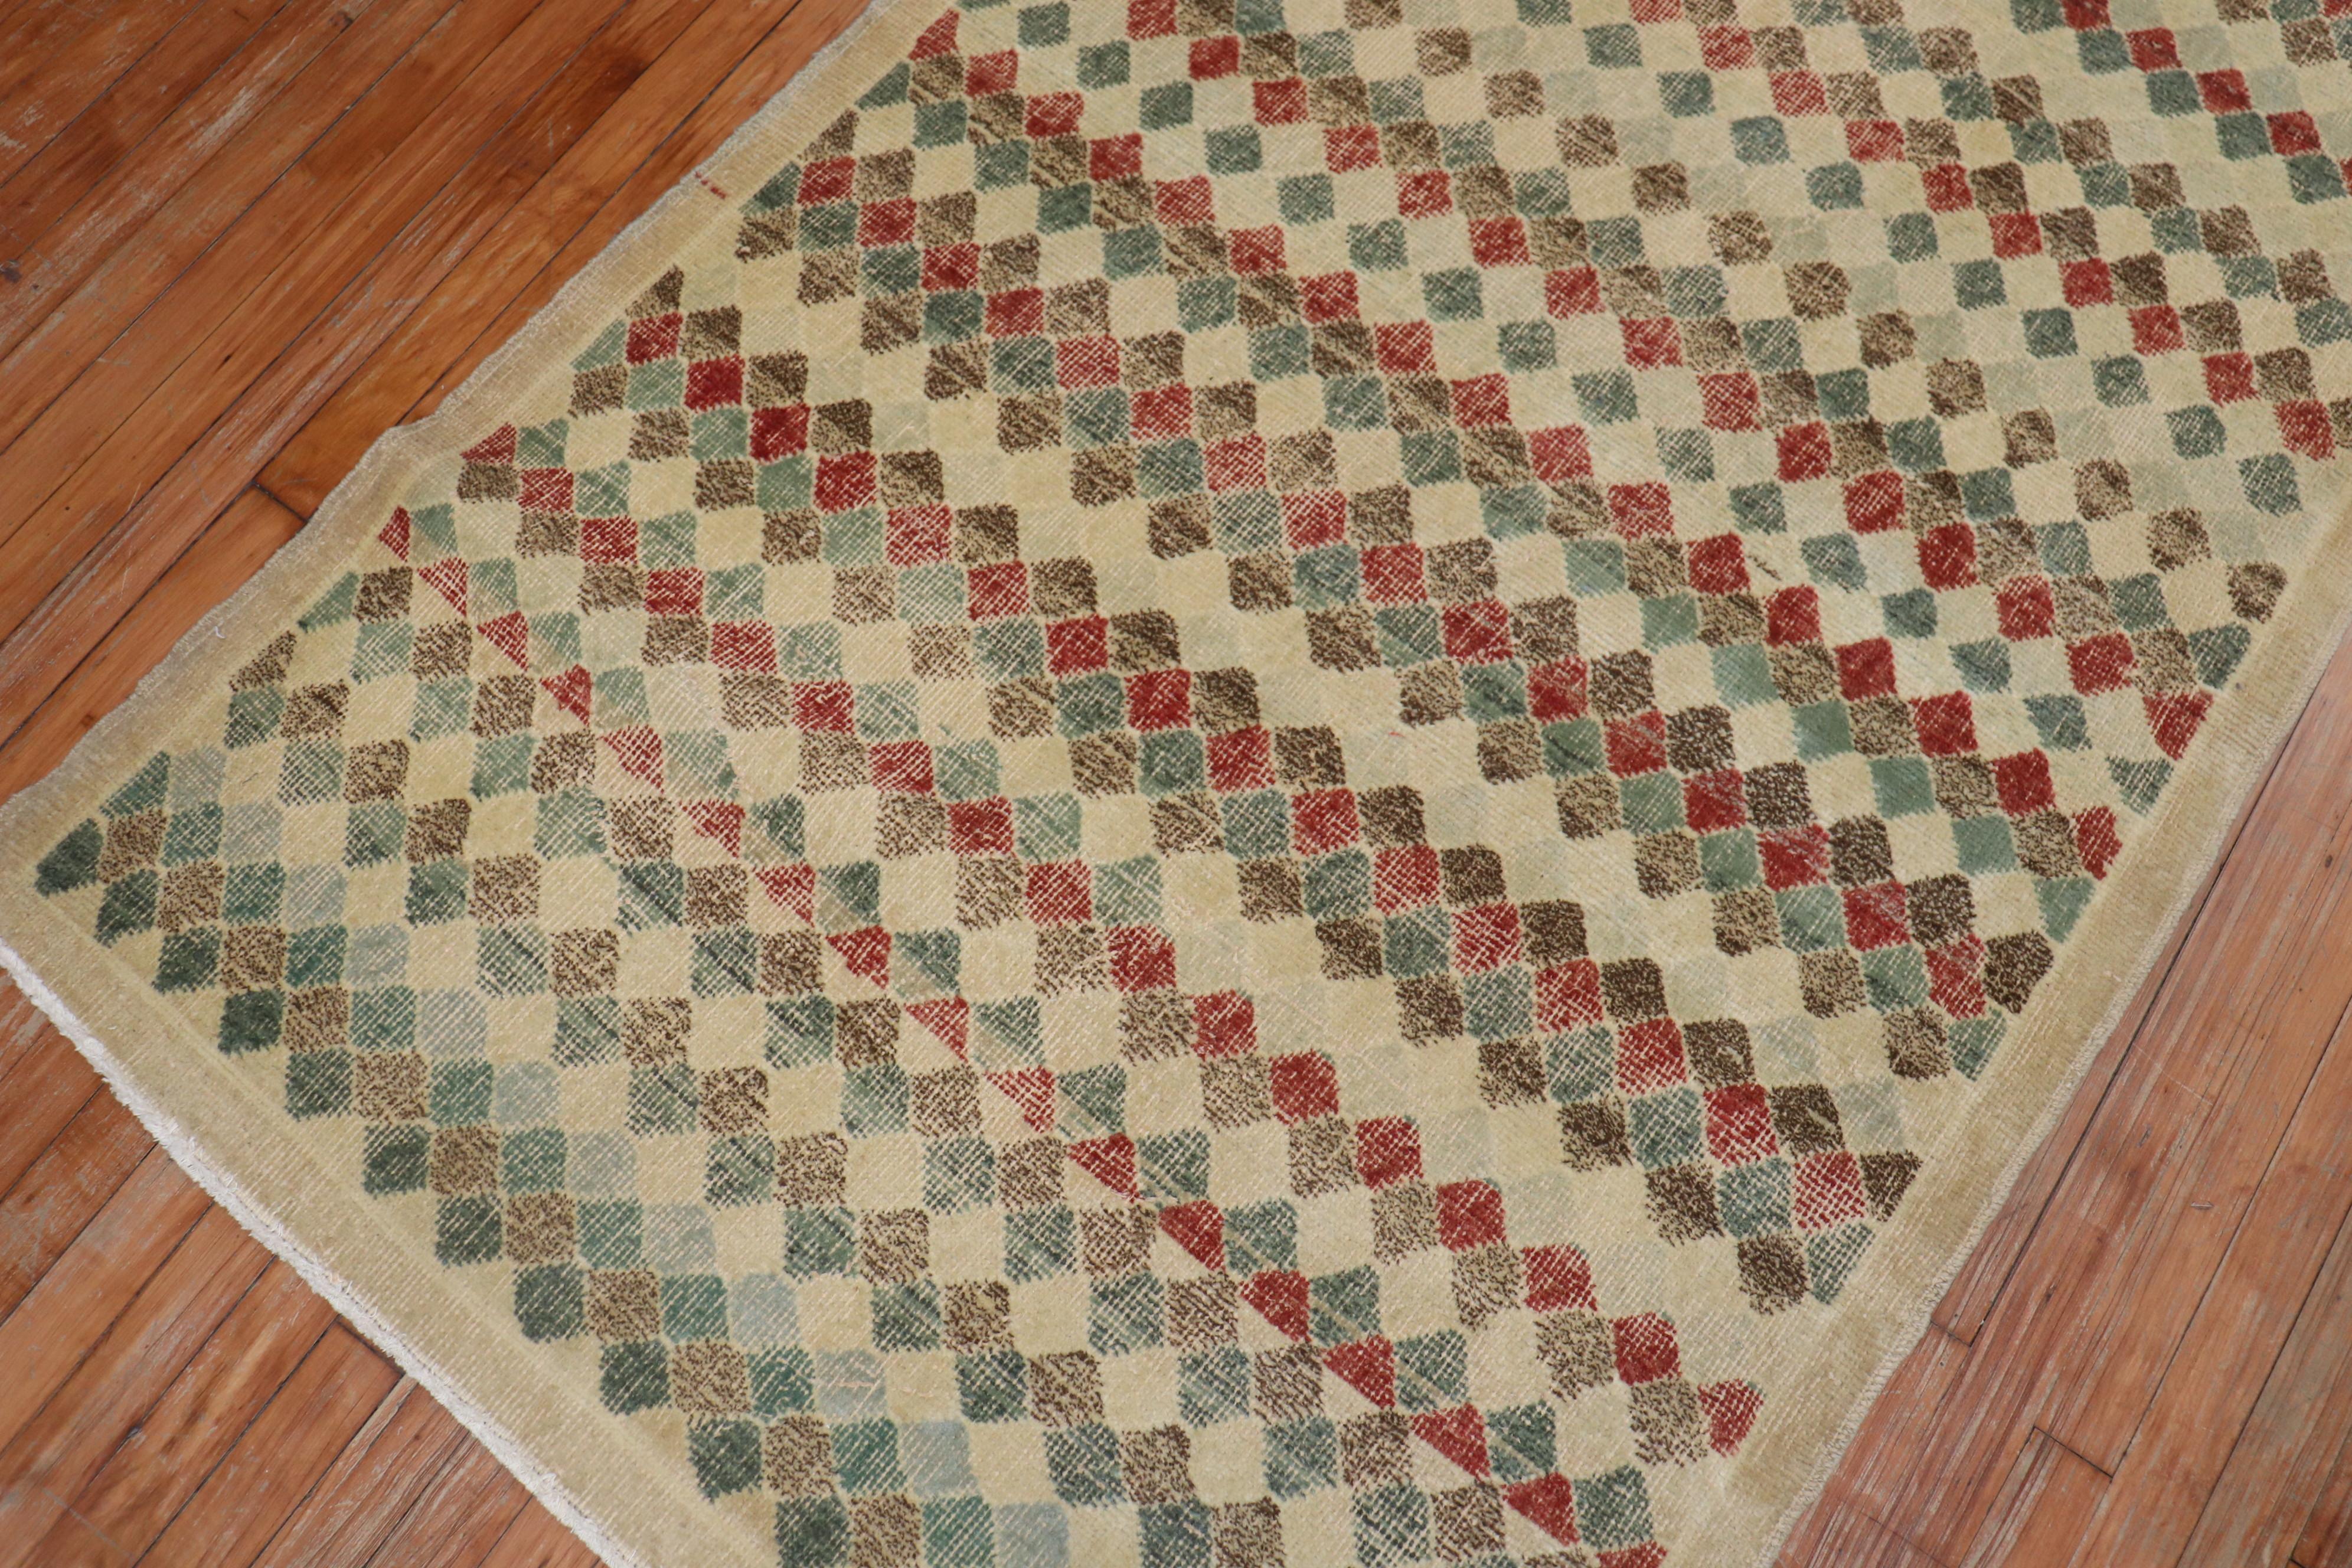 Vintage Turkish Deco rug with an all-over diamond motif on a beige field. Accents in red, brown, green blue and rust.

Measures: 4' x 8'7